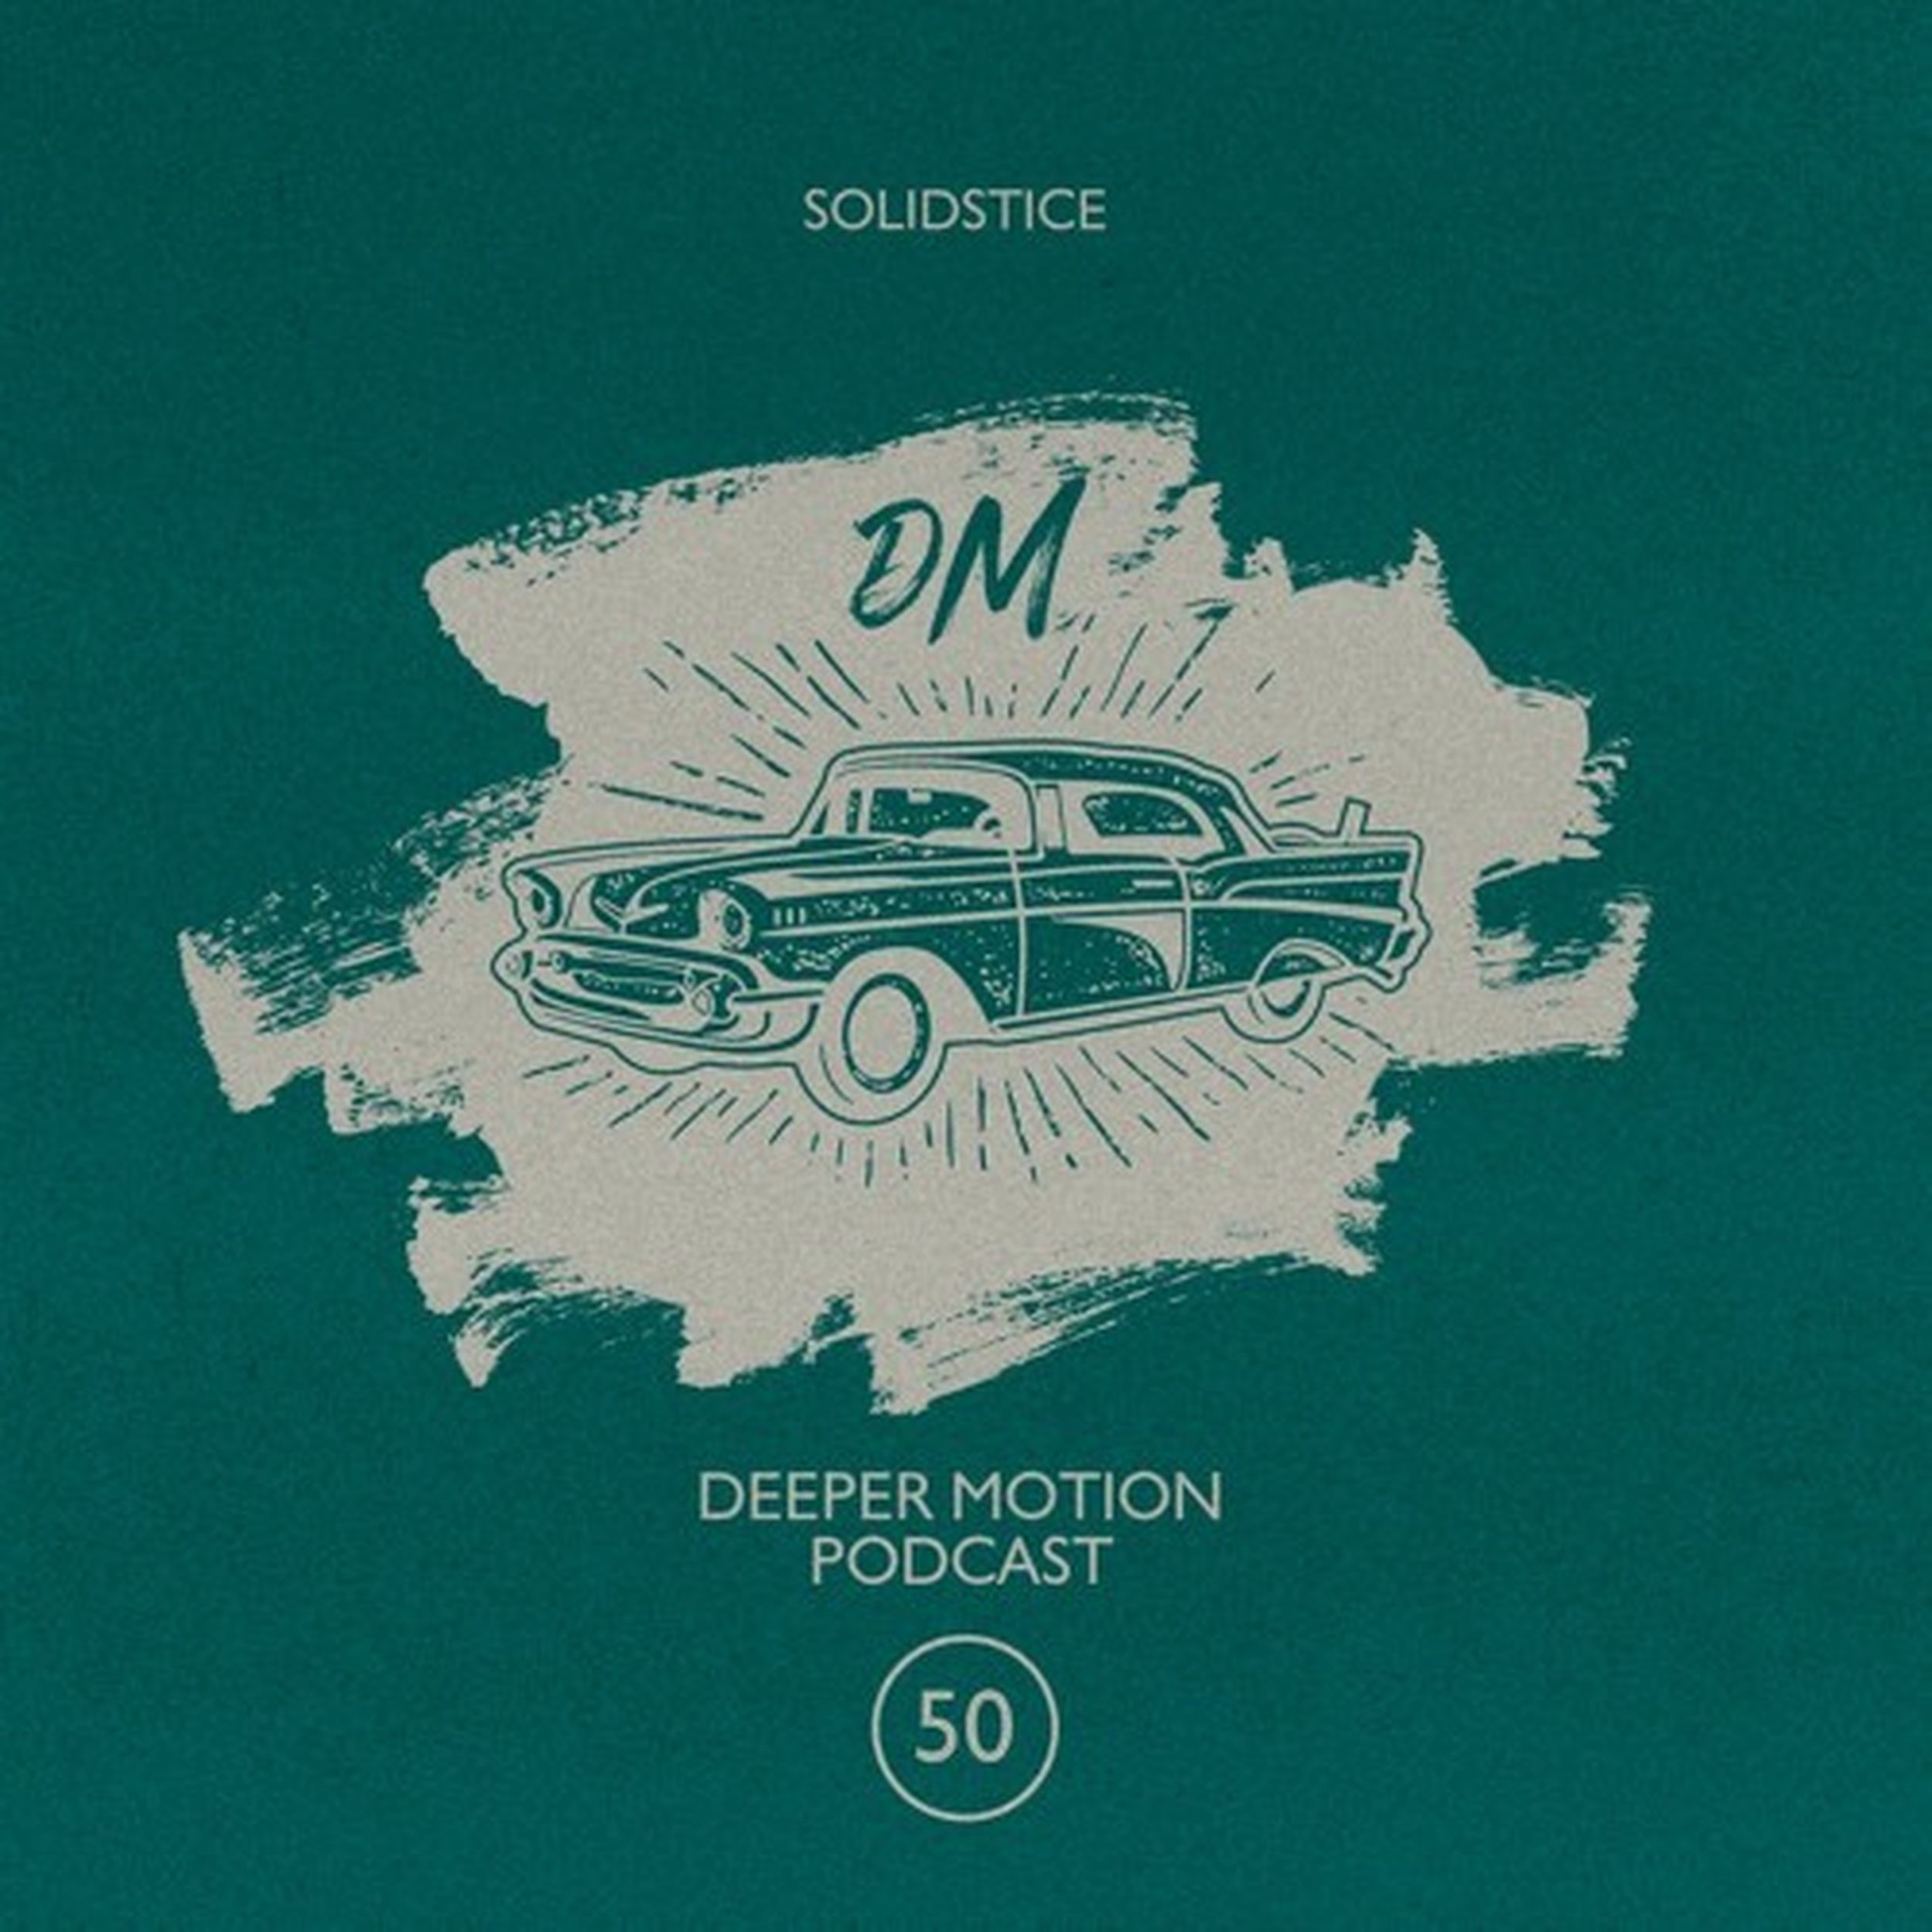 Deeper Motion Podcast. Deeper Motion recordings. Solidstice. Deep motion